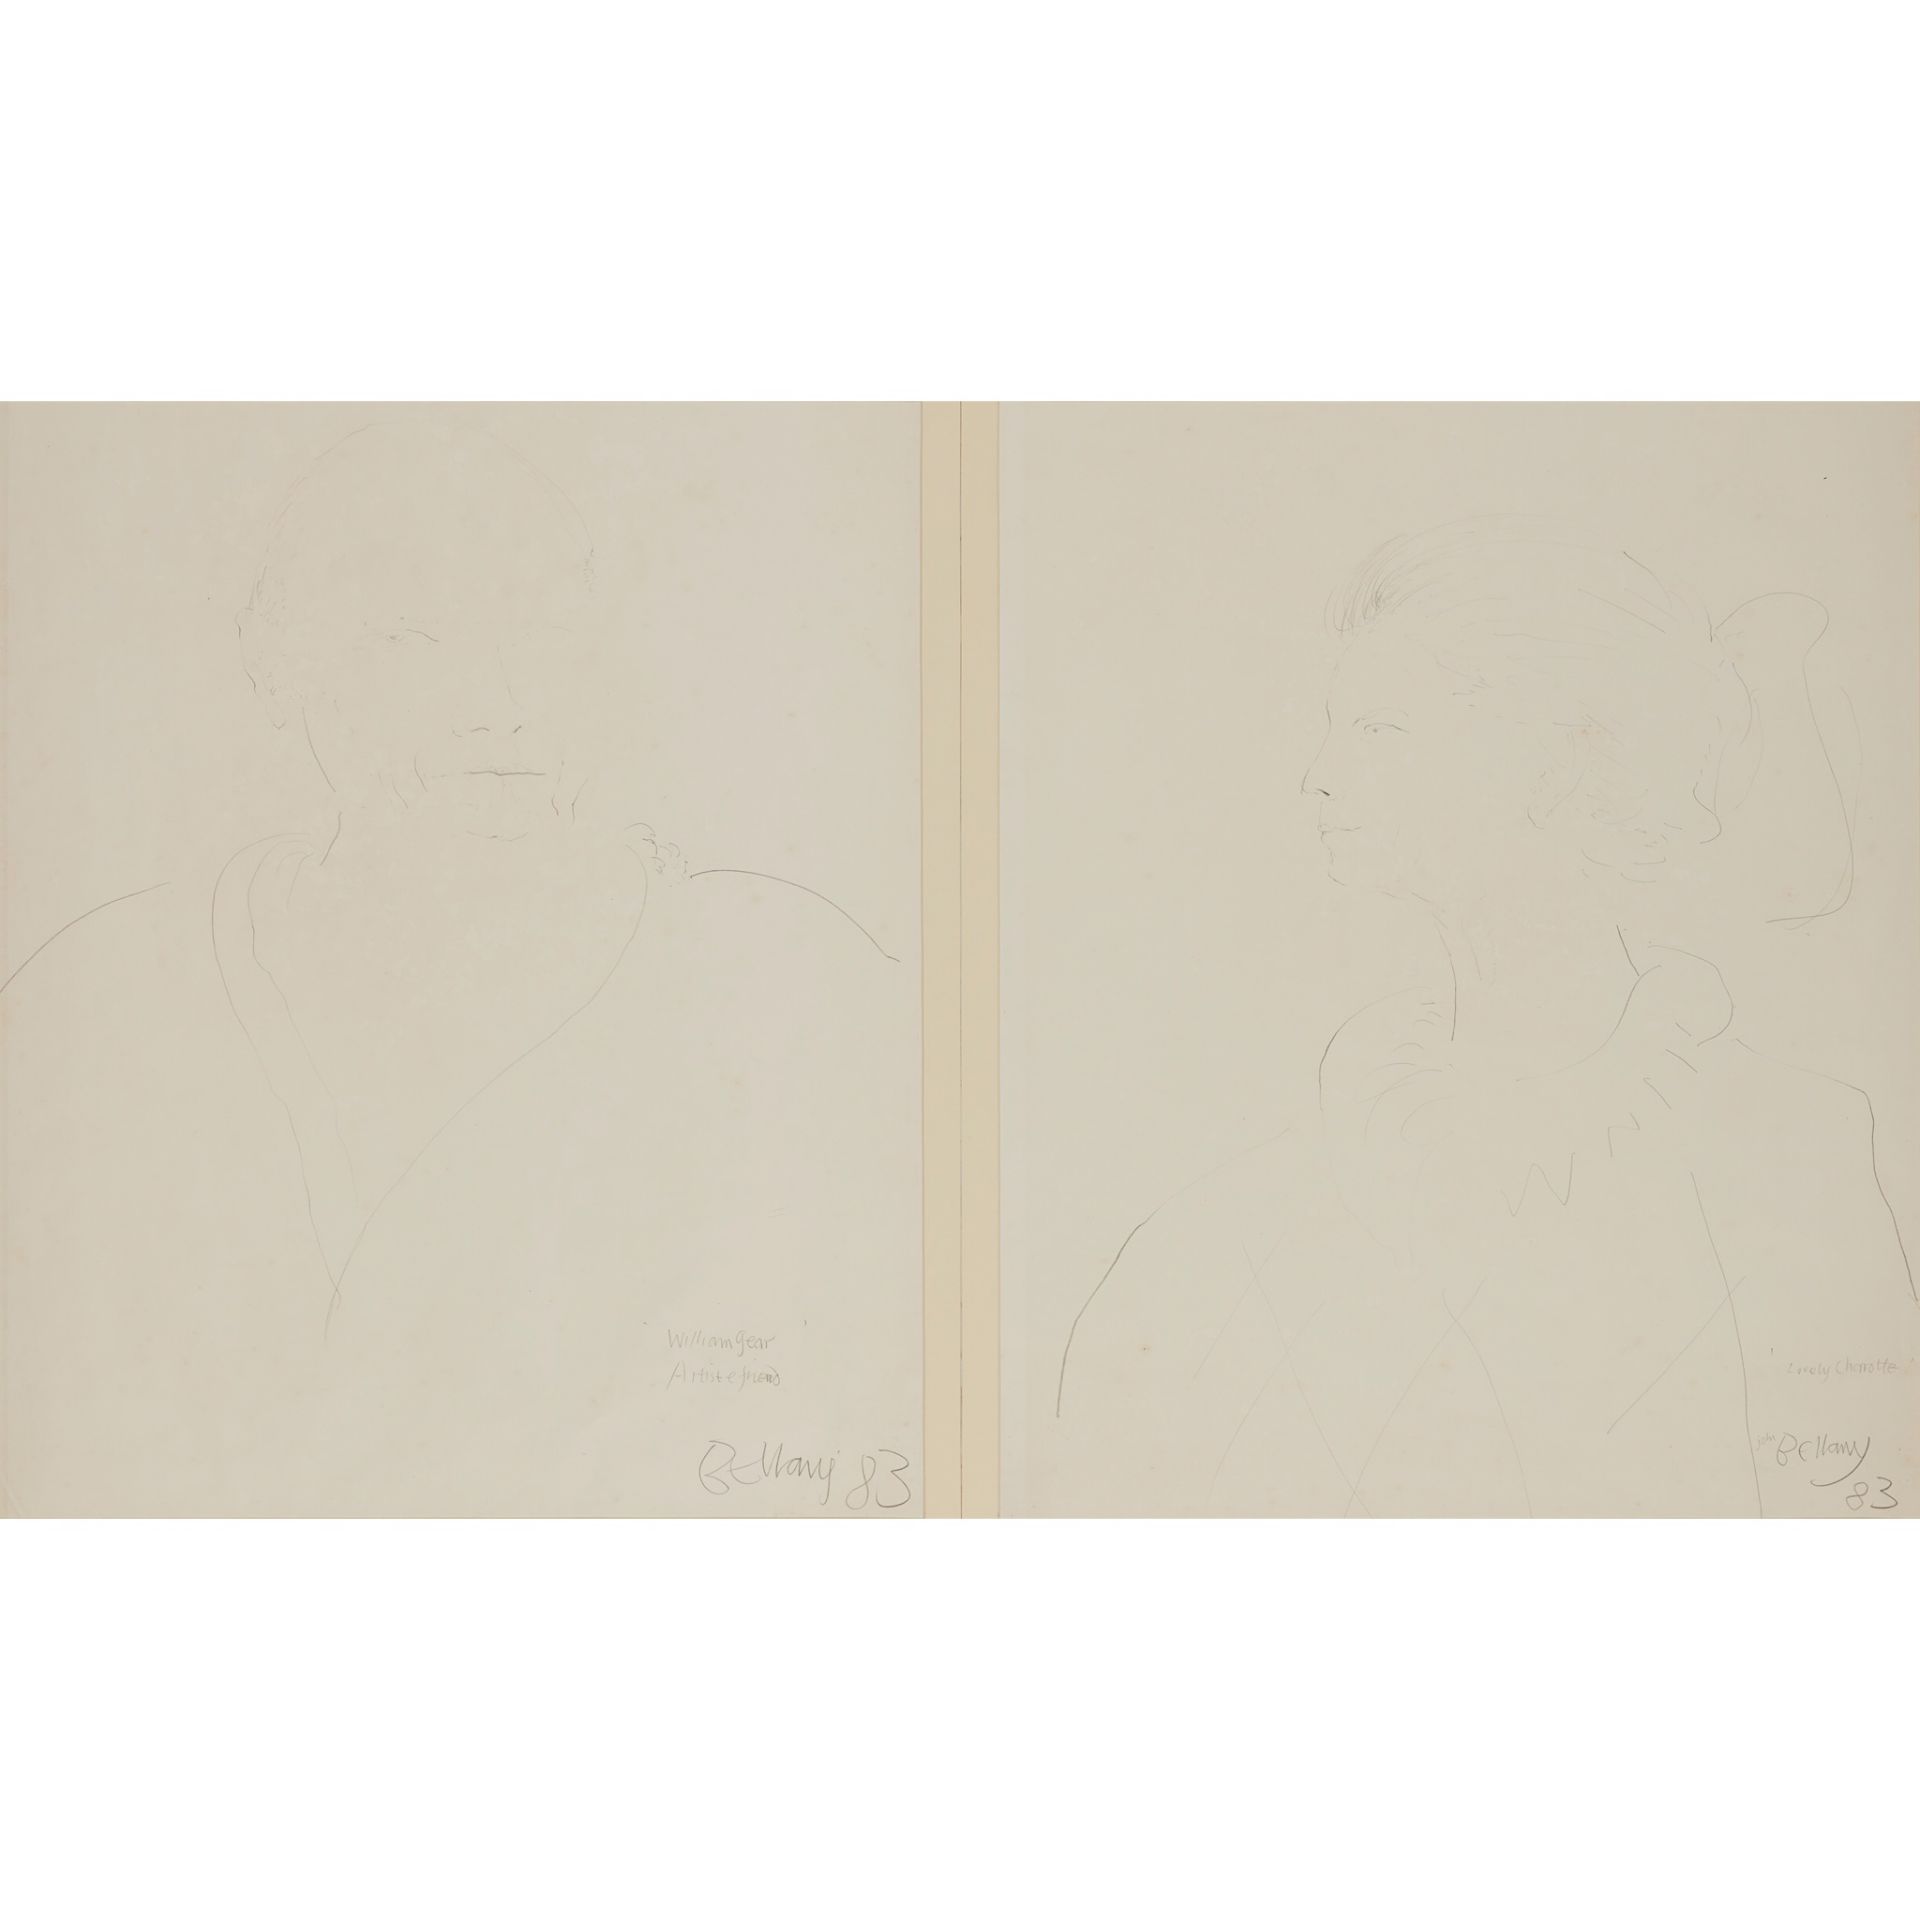 § JOHN BELLANY C.B.E., R.A. (SCOTTISH 1942-2013) DIPTYCH DRAWING OF WILLIAM GEAR AND CHARLOTTE,